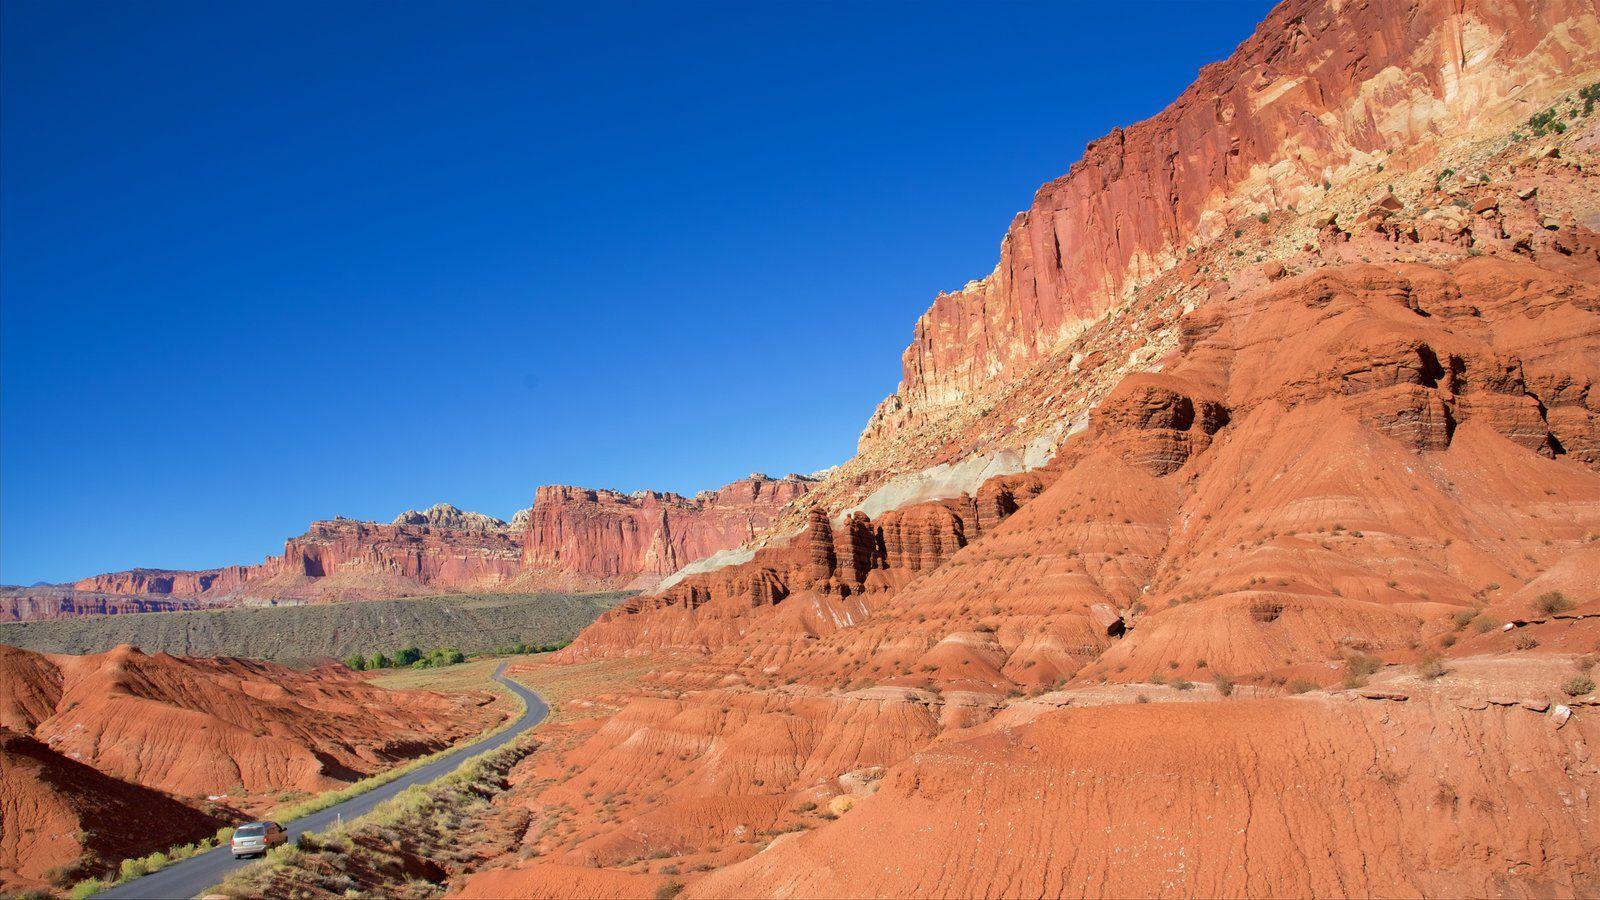 Central Utah Picture: View Photo & Image of Central Utah